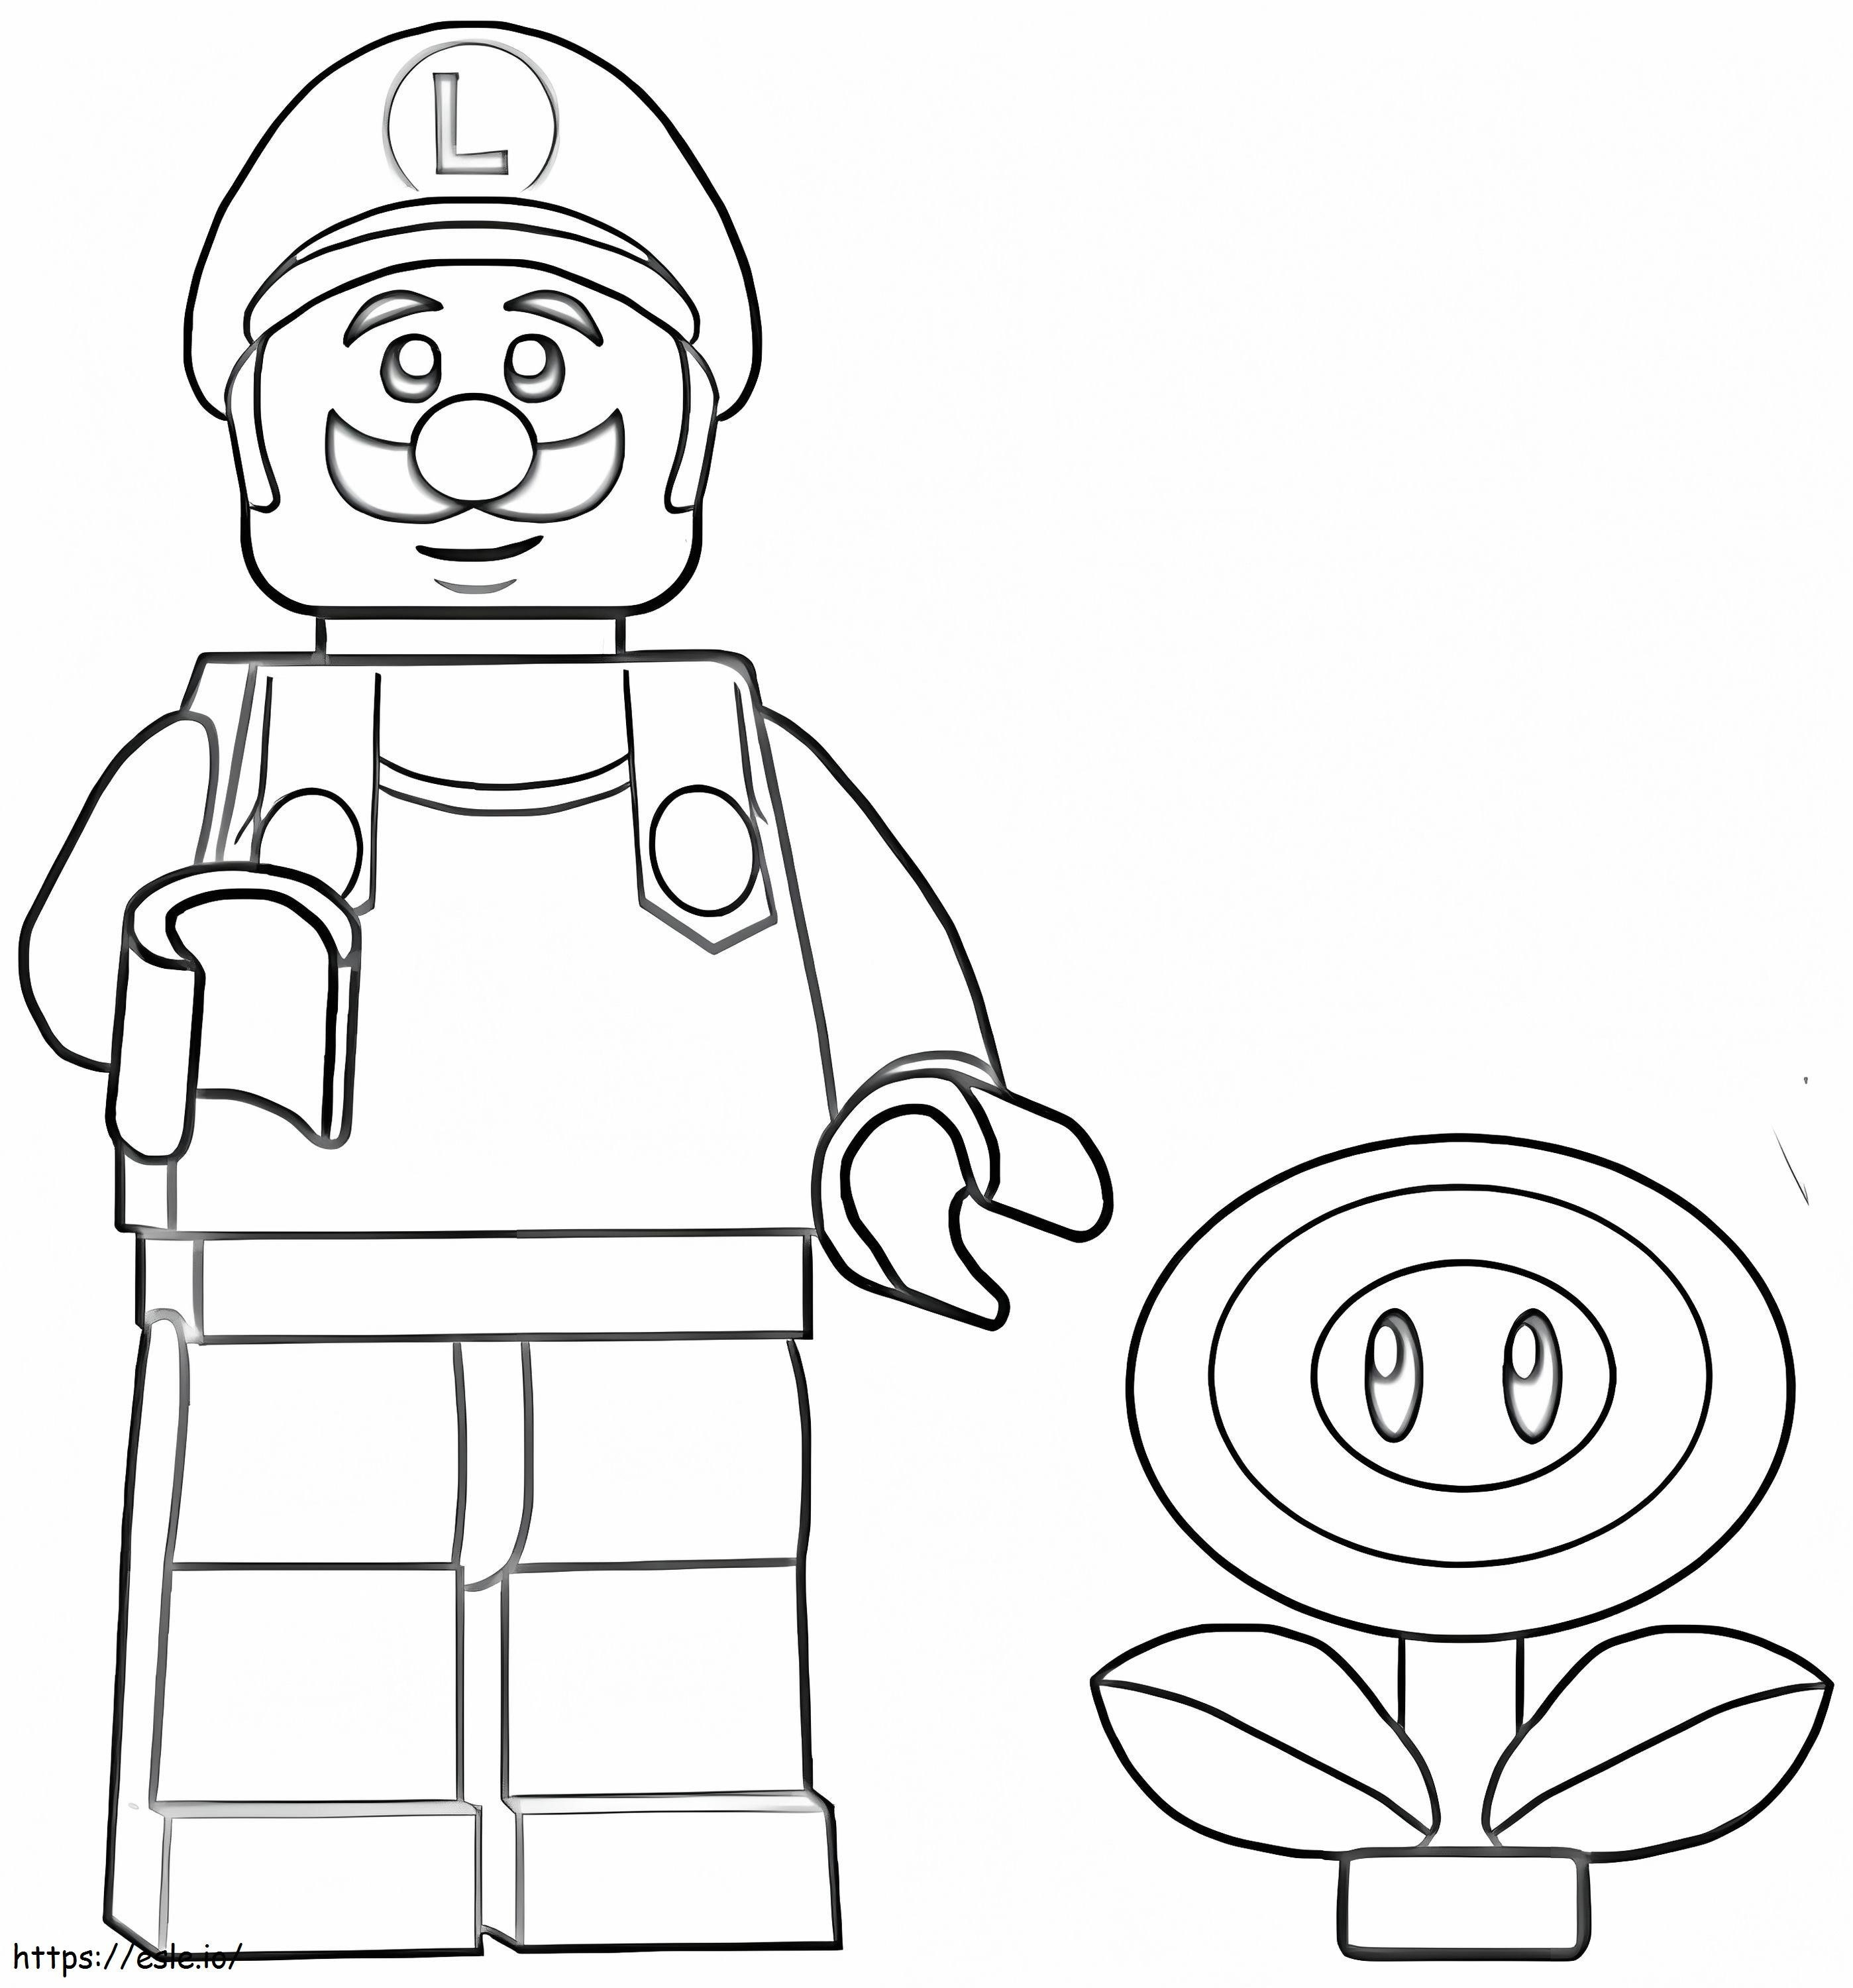 Lego Luigi And Flower coloring page